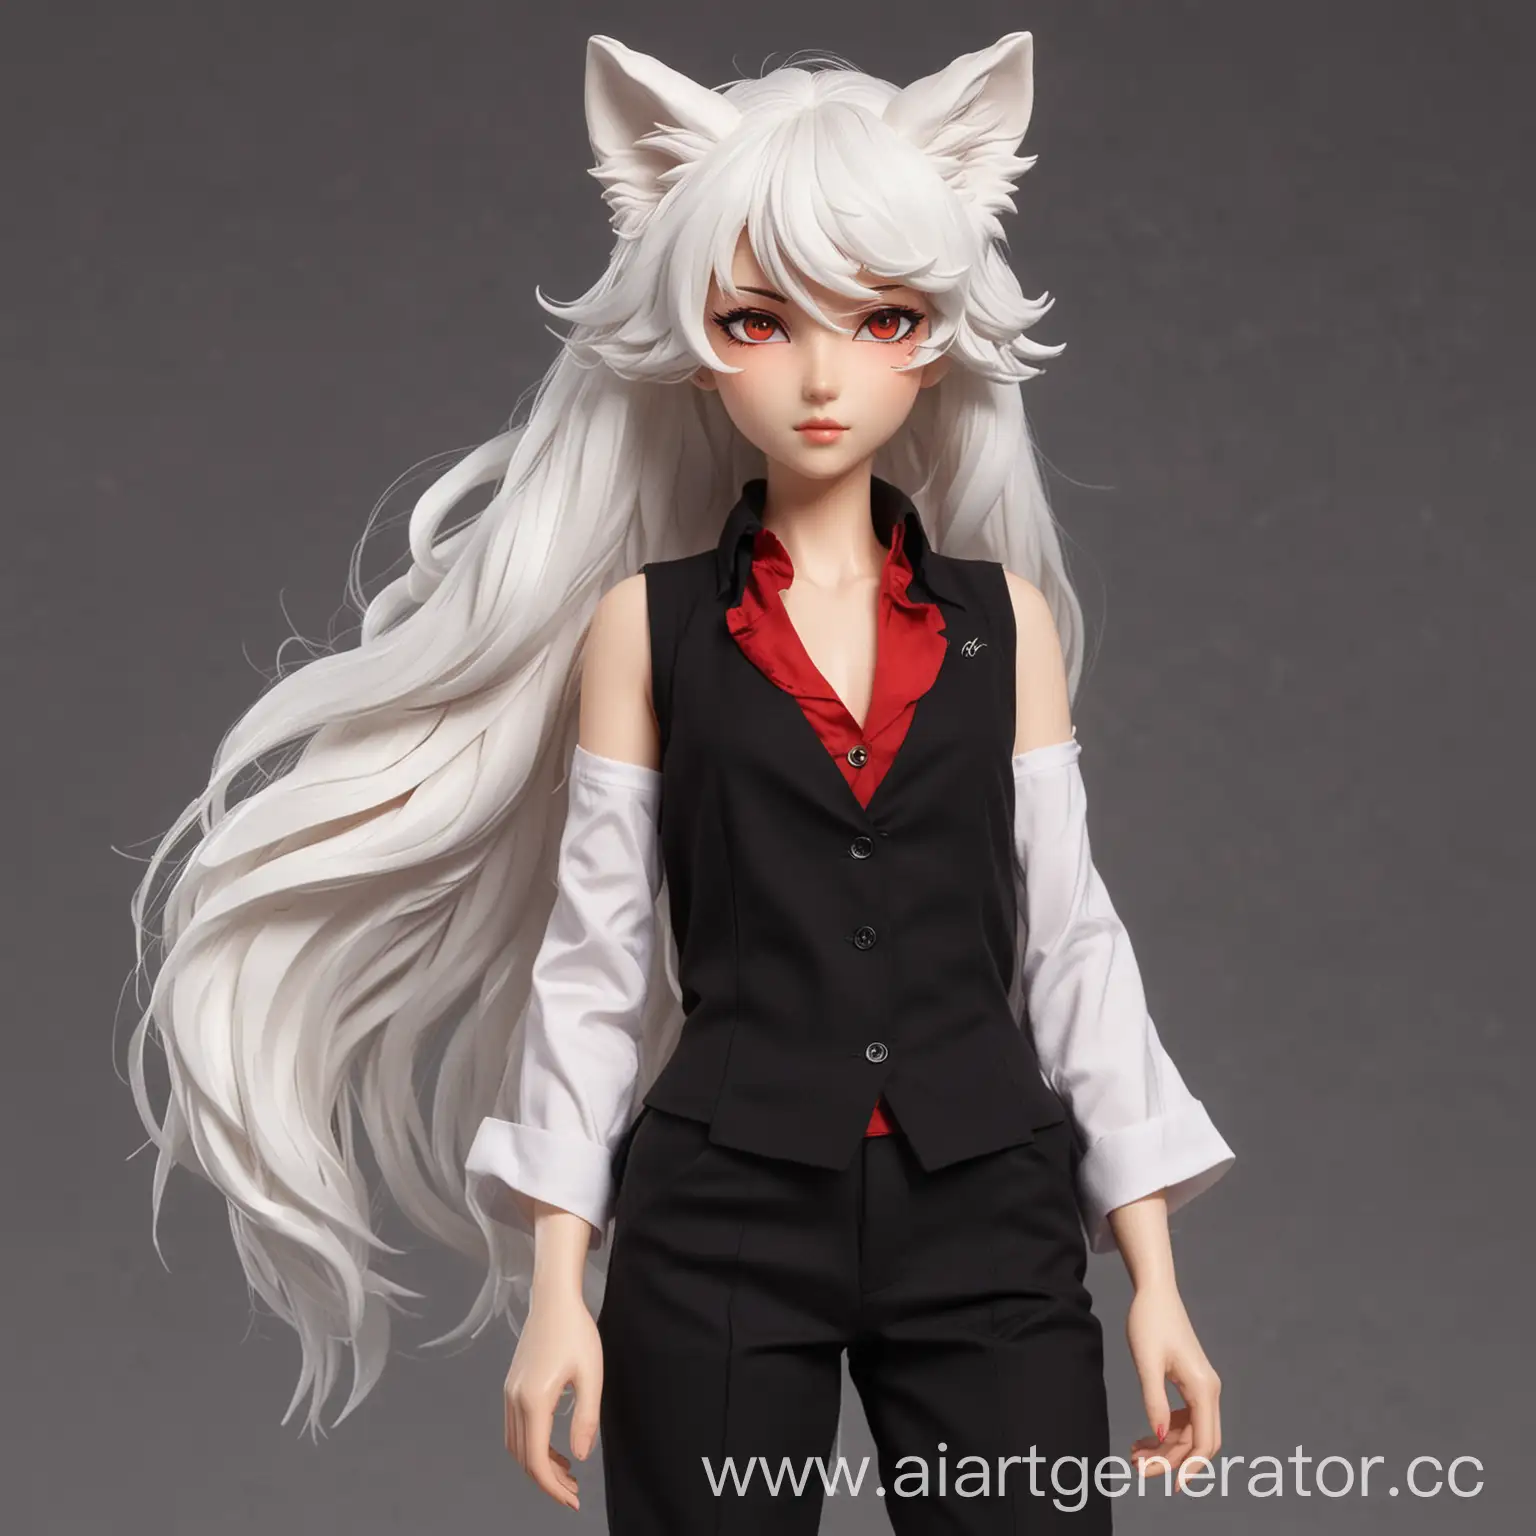 Anime-Style-Kitsune-with-Five-Tails-and-Unique-Fashion